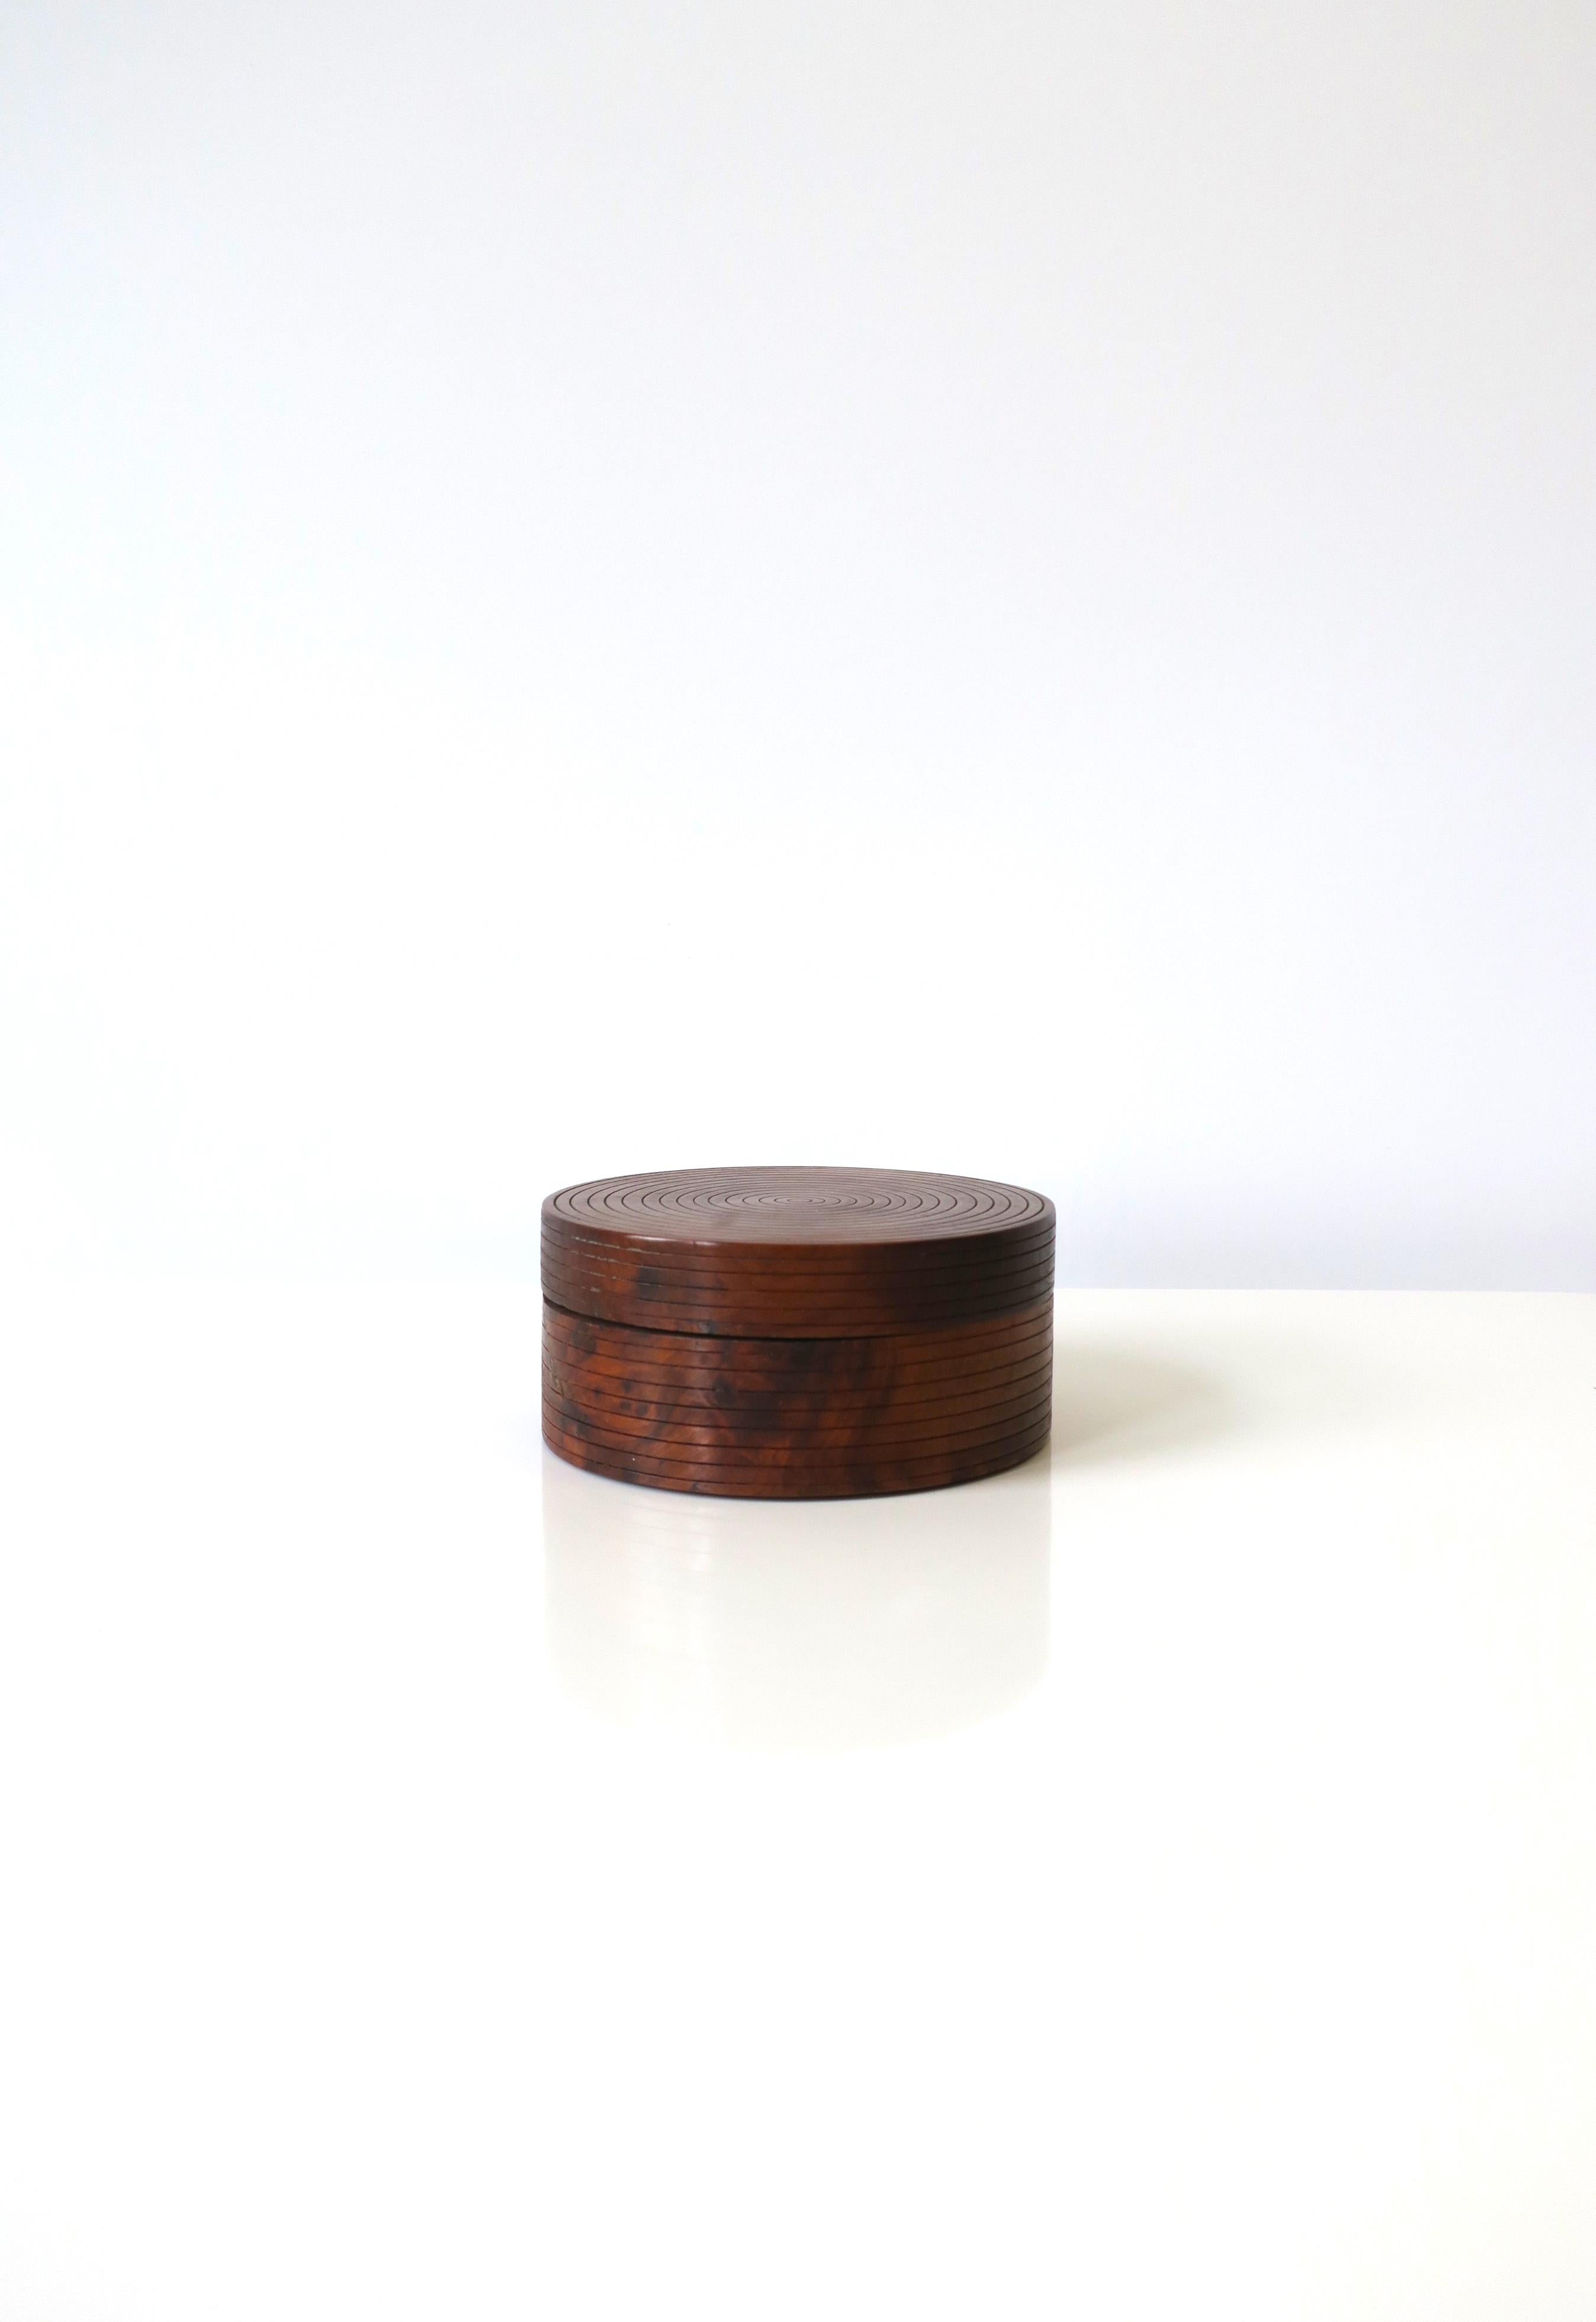 Etched Burl Wood Jewelry Box For Sale